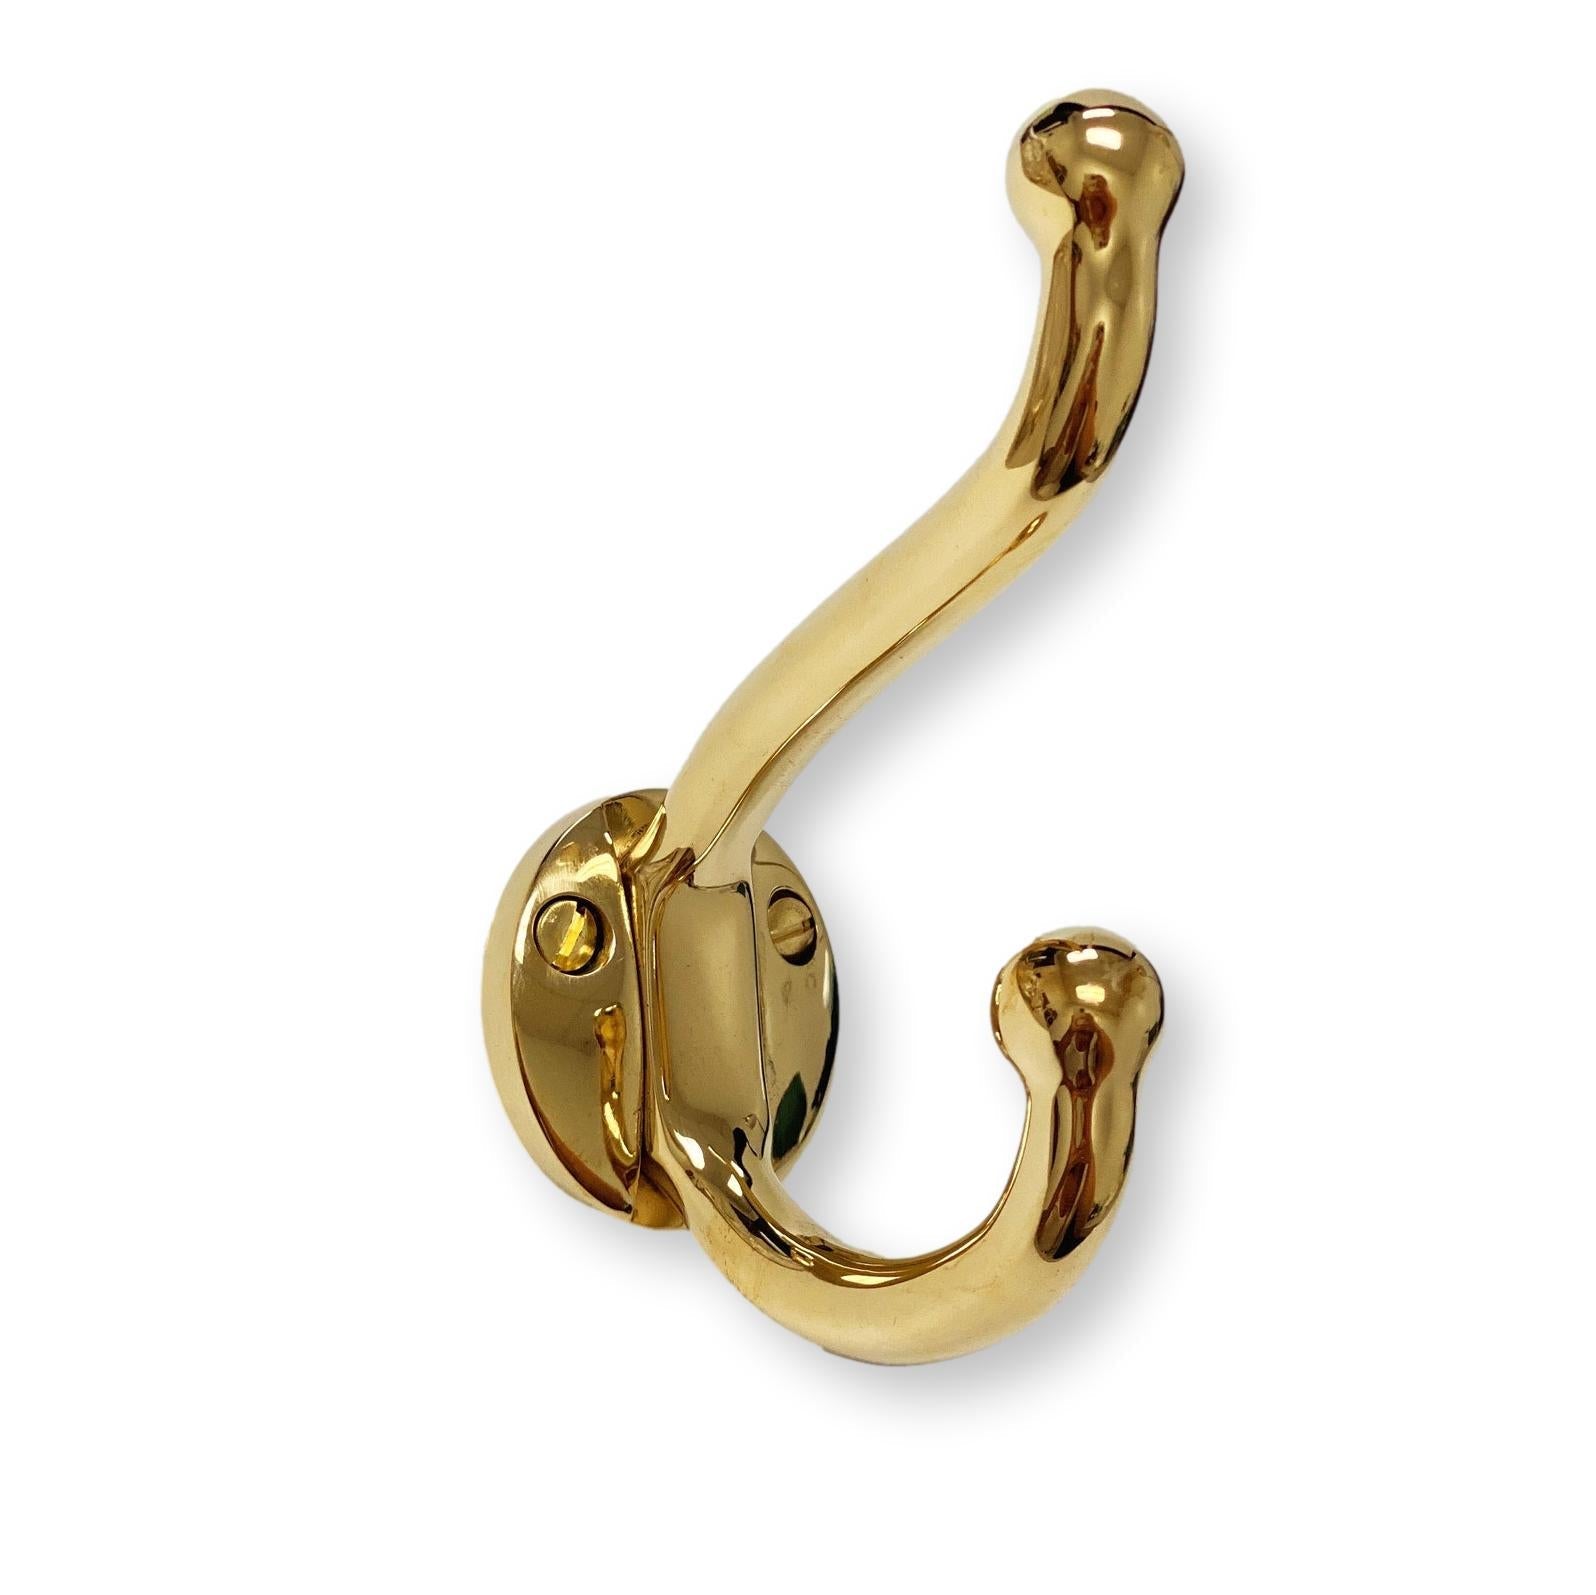 Polished Unlacquered Brass "Heritage" Wall Hook, Brass Wall Coat Hook - Forge Hardware Studio